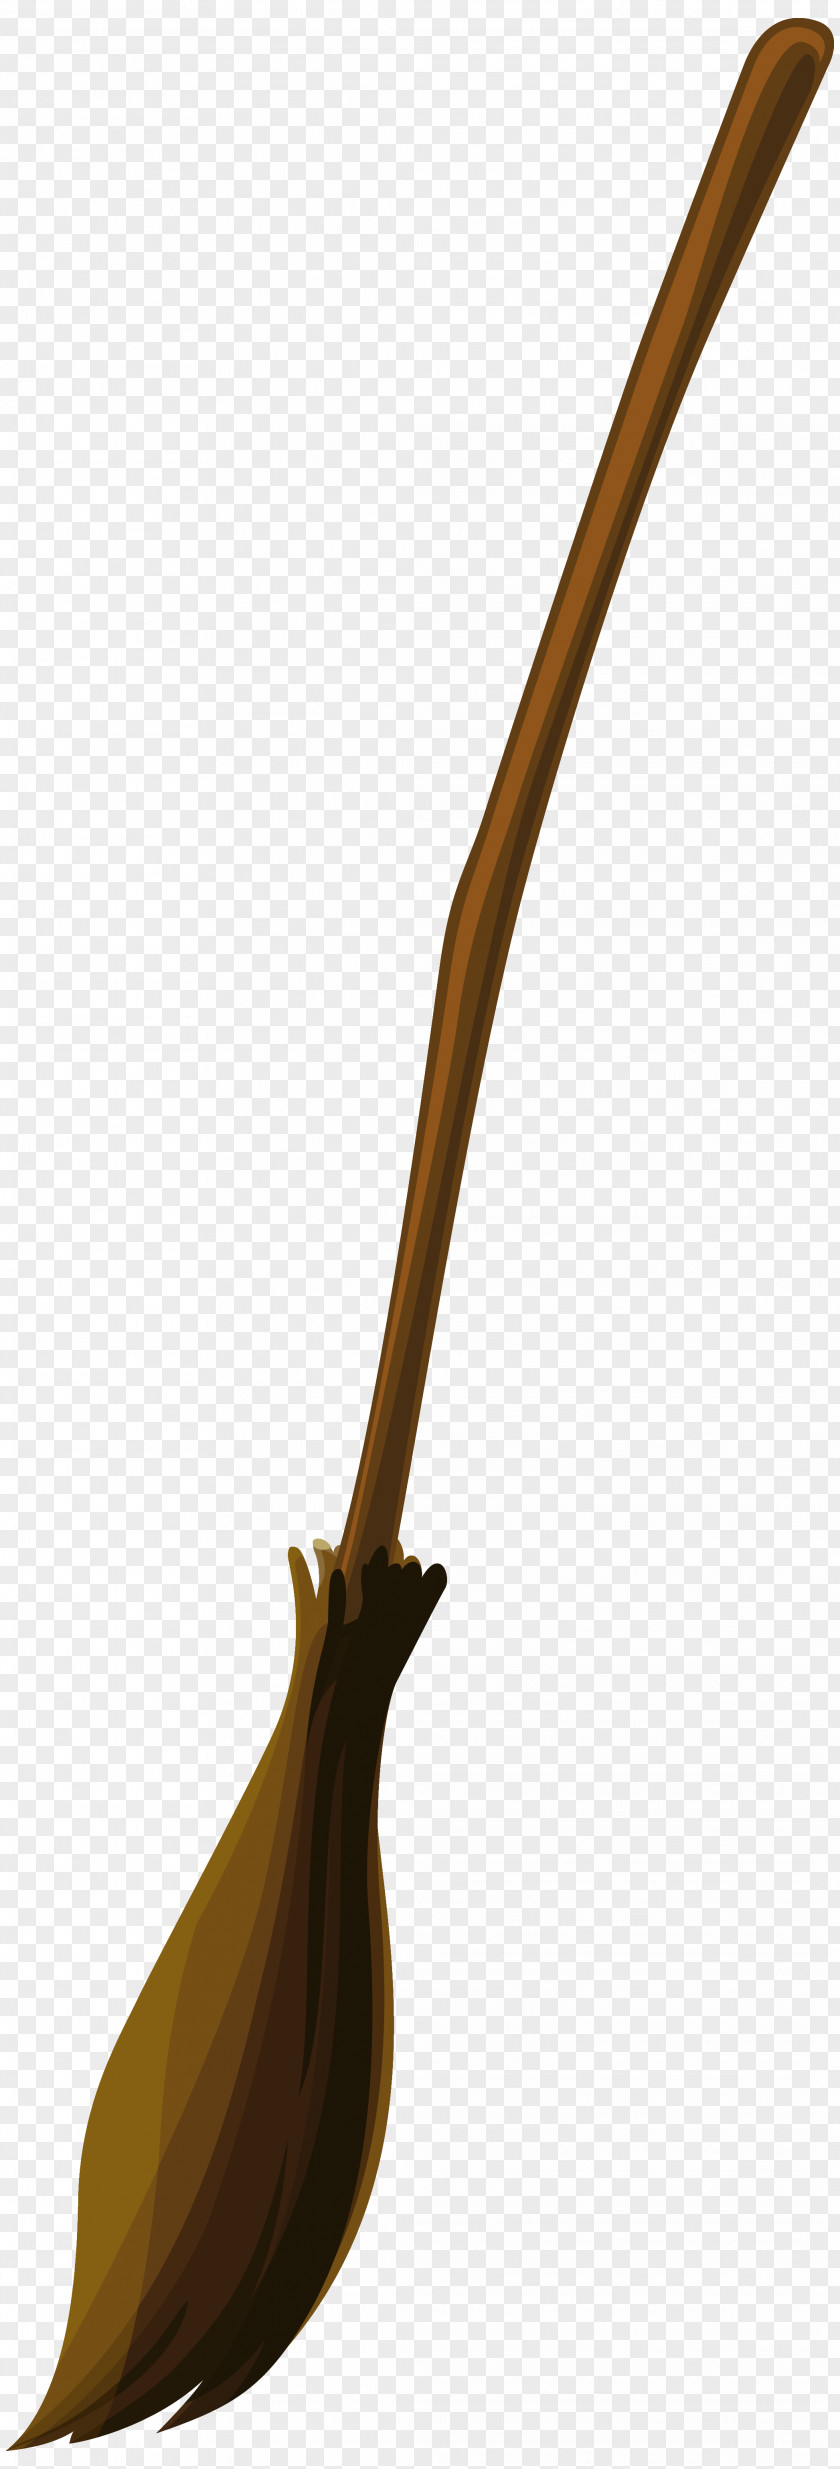 Halloween Broomstick Cliparts Witch's Broom Witchcraft Clip Art PNG